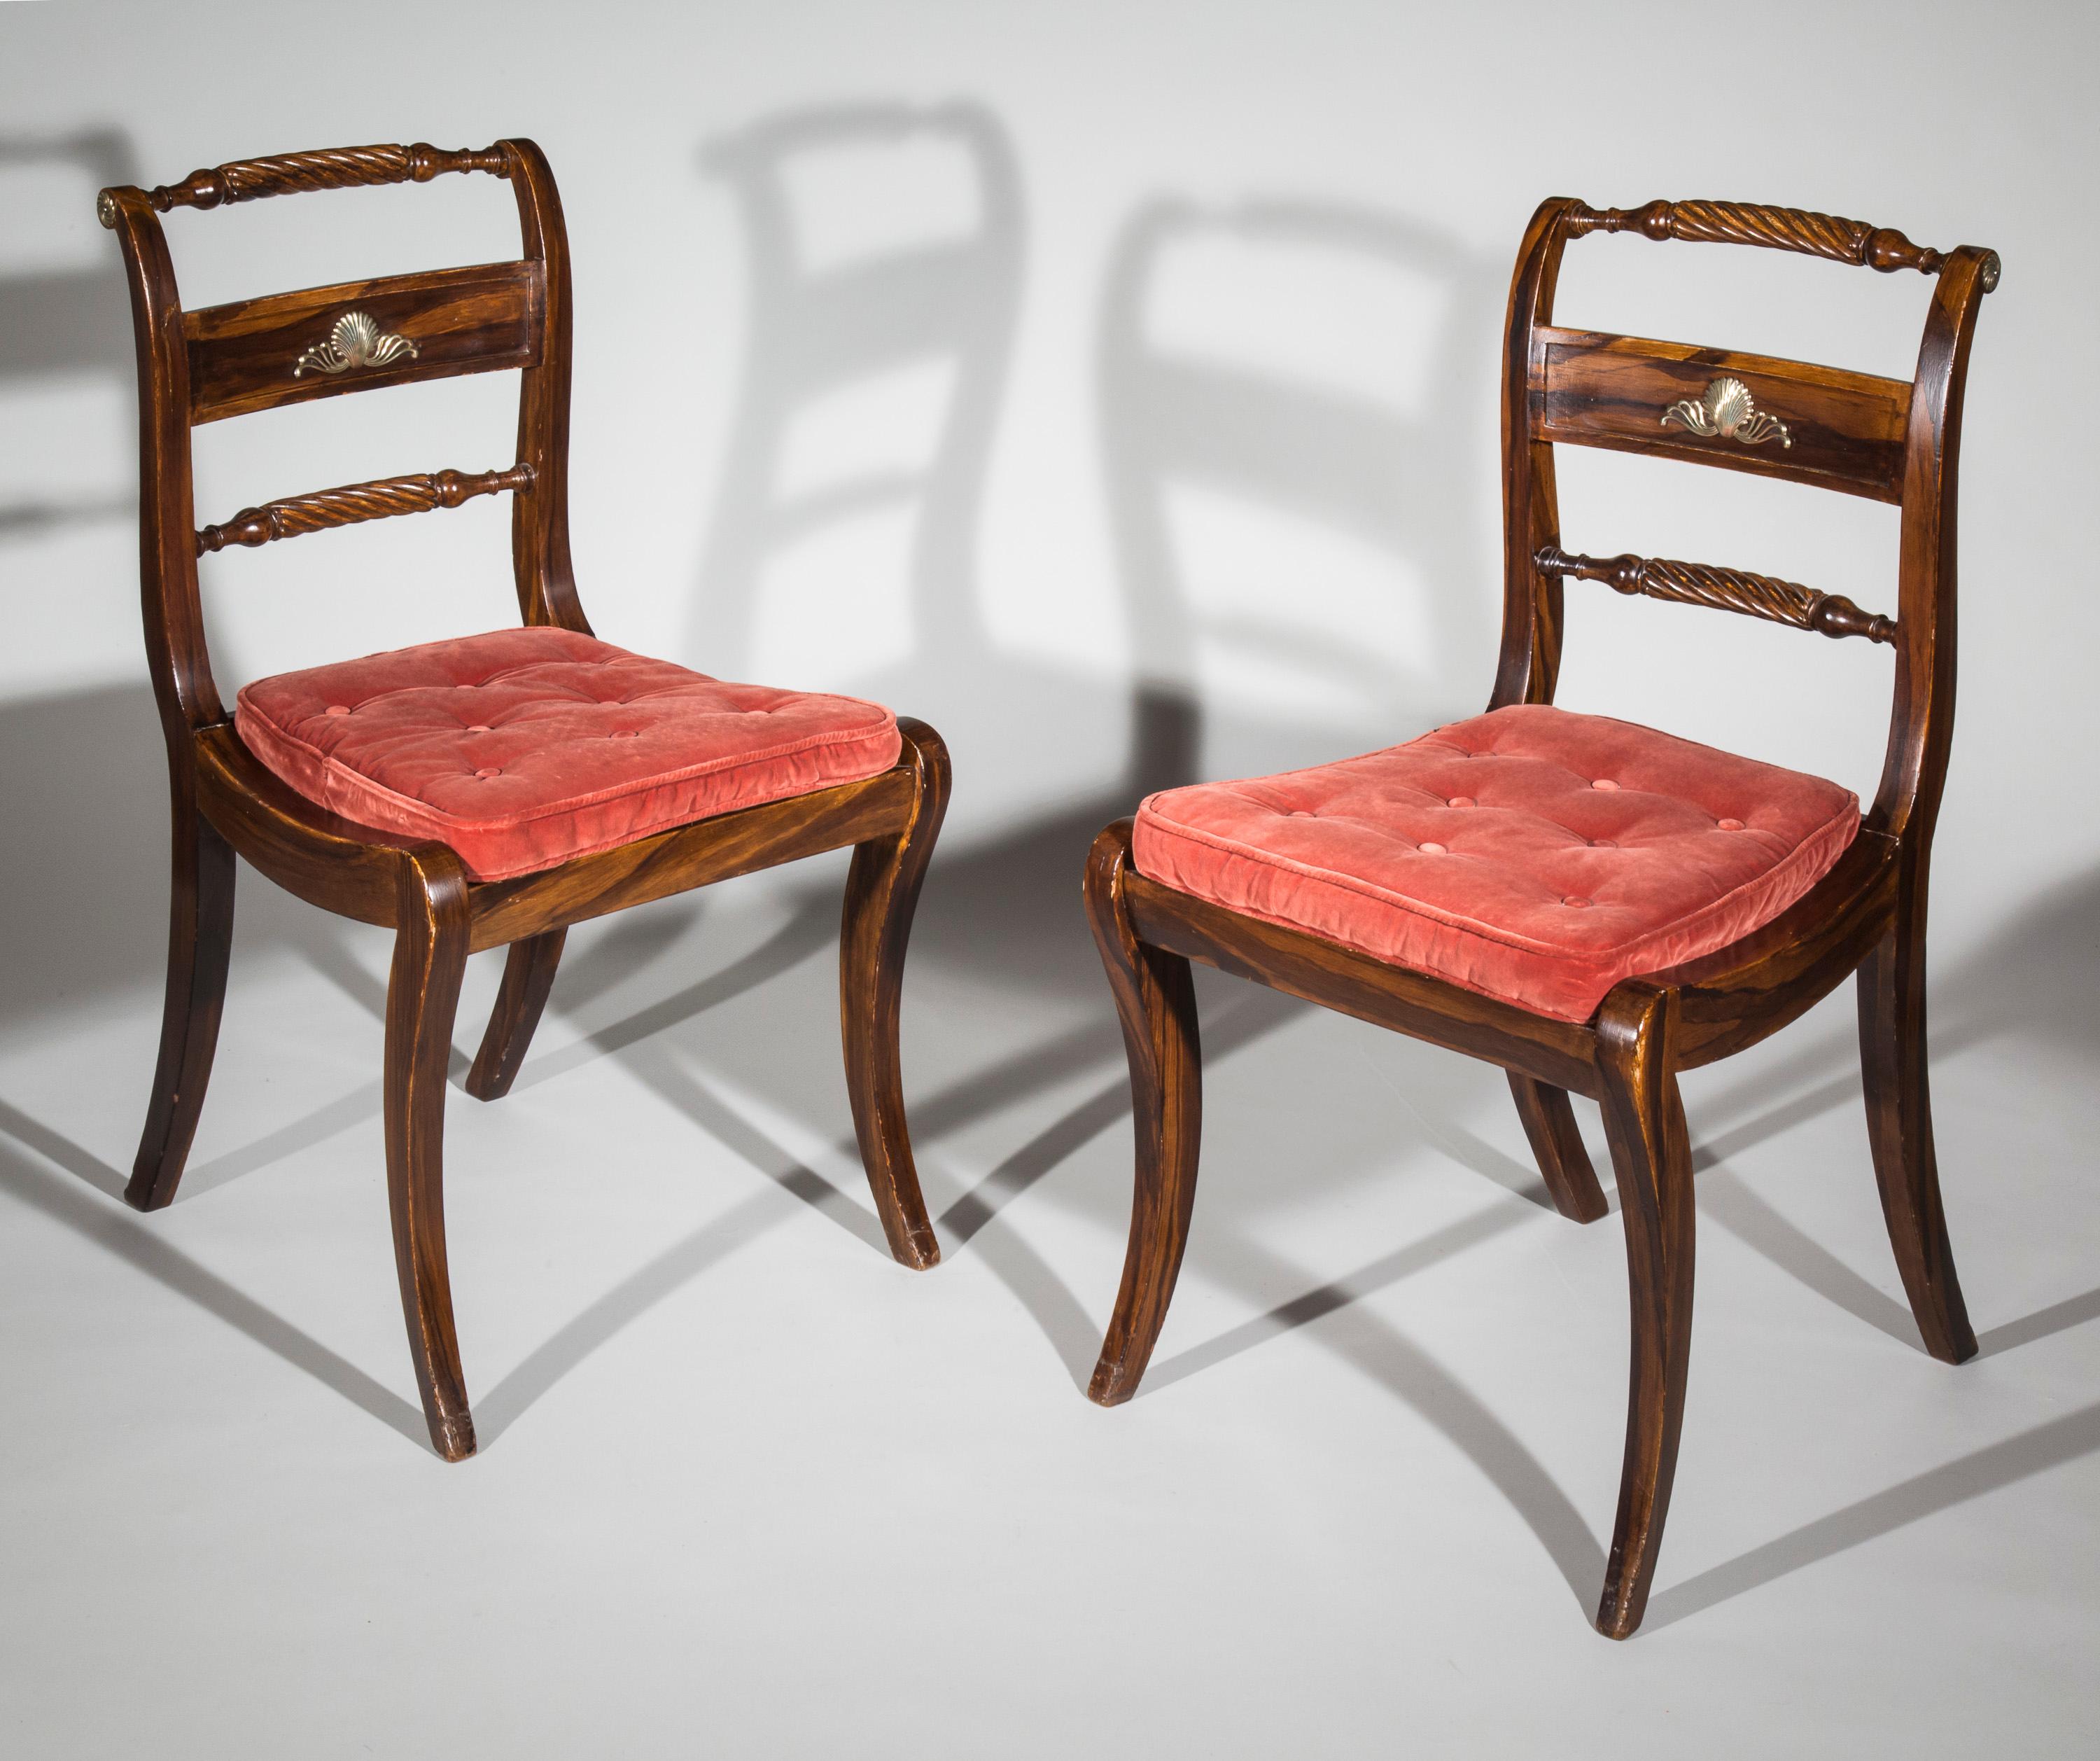 An elegant pair of early 19th century Regency period Klismos chairs, brass-mounted and faux-bois painted.

English circa 1820.

These faux-bois painted and cane-seated chairs, with Grecian boldly curved legs and brass ornaments, are designed in the